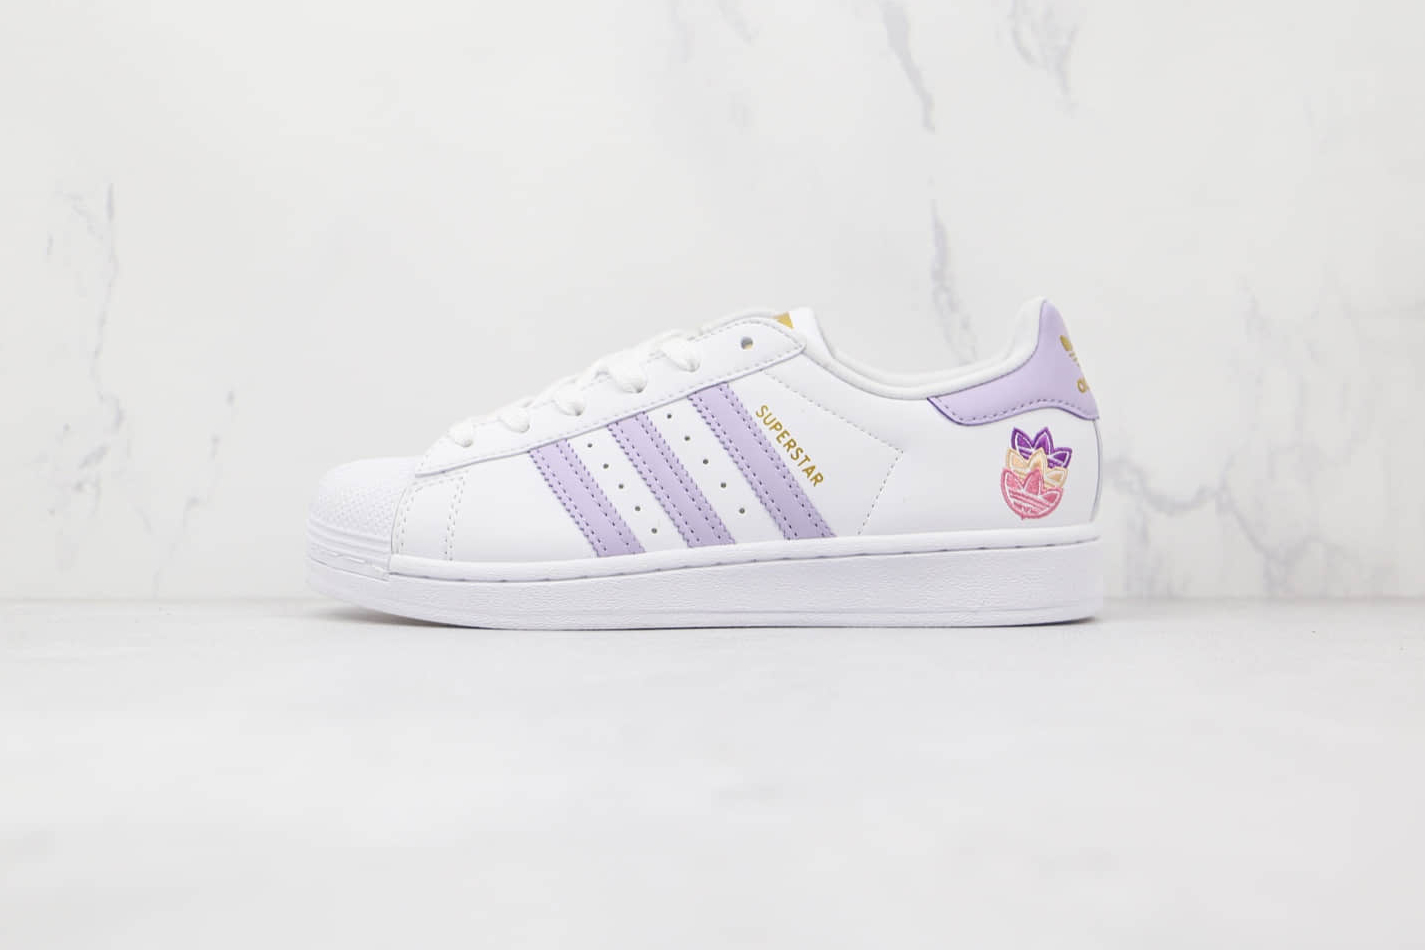 Adidas Superstar 'White Purple Tint' GZ8143 - Ultimate Style and Comfort for Sneaker Enthusiasts